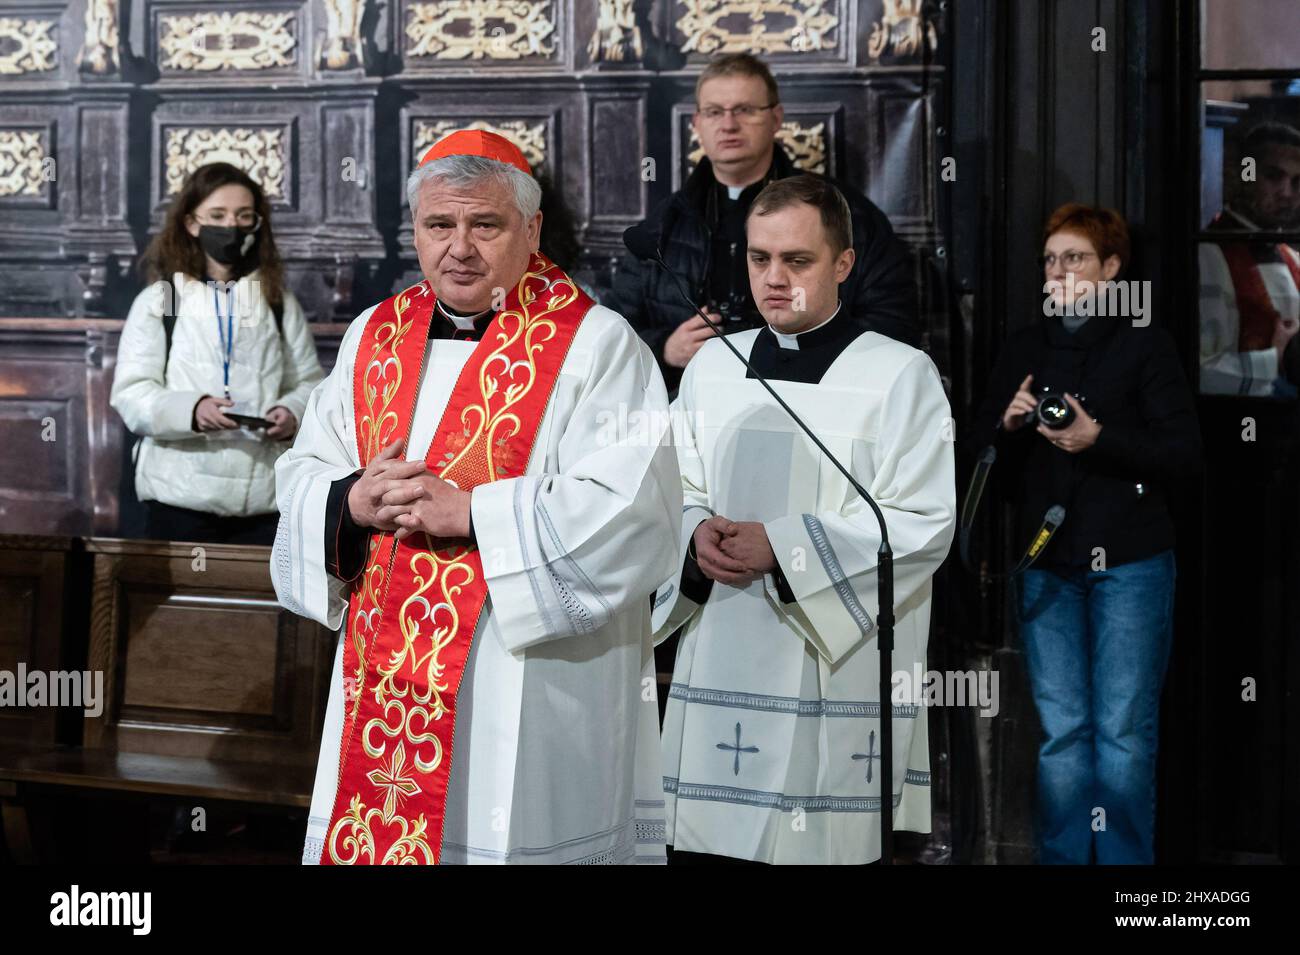 Lviv, Ukraine. 10th Mar, 2022. Cardinal Konrad Krajewski (C) seen at the Cathedral. The Polish Cardinal Konrad Krajewski, the Papal Almoner in Ukraine, attended the interfaith prayer service at the Cathedral of the Assumption of the Blessed Virgin Mary (Lviv Metropolitan Basilica) in Lviv at the presence of representatives of the Pan-Ukrainian Council of Churches and different religious communities. Credit: SOPA Images Limited/Alamy Live News Stock Photo